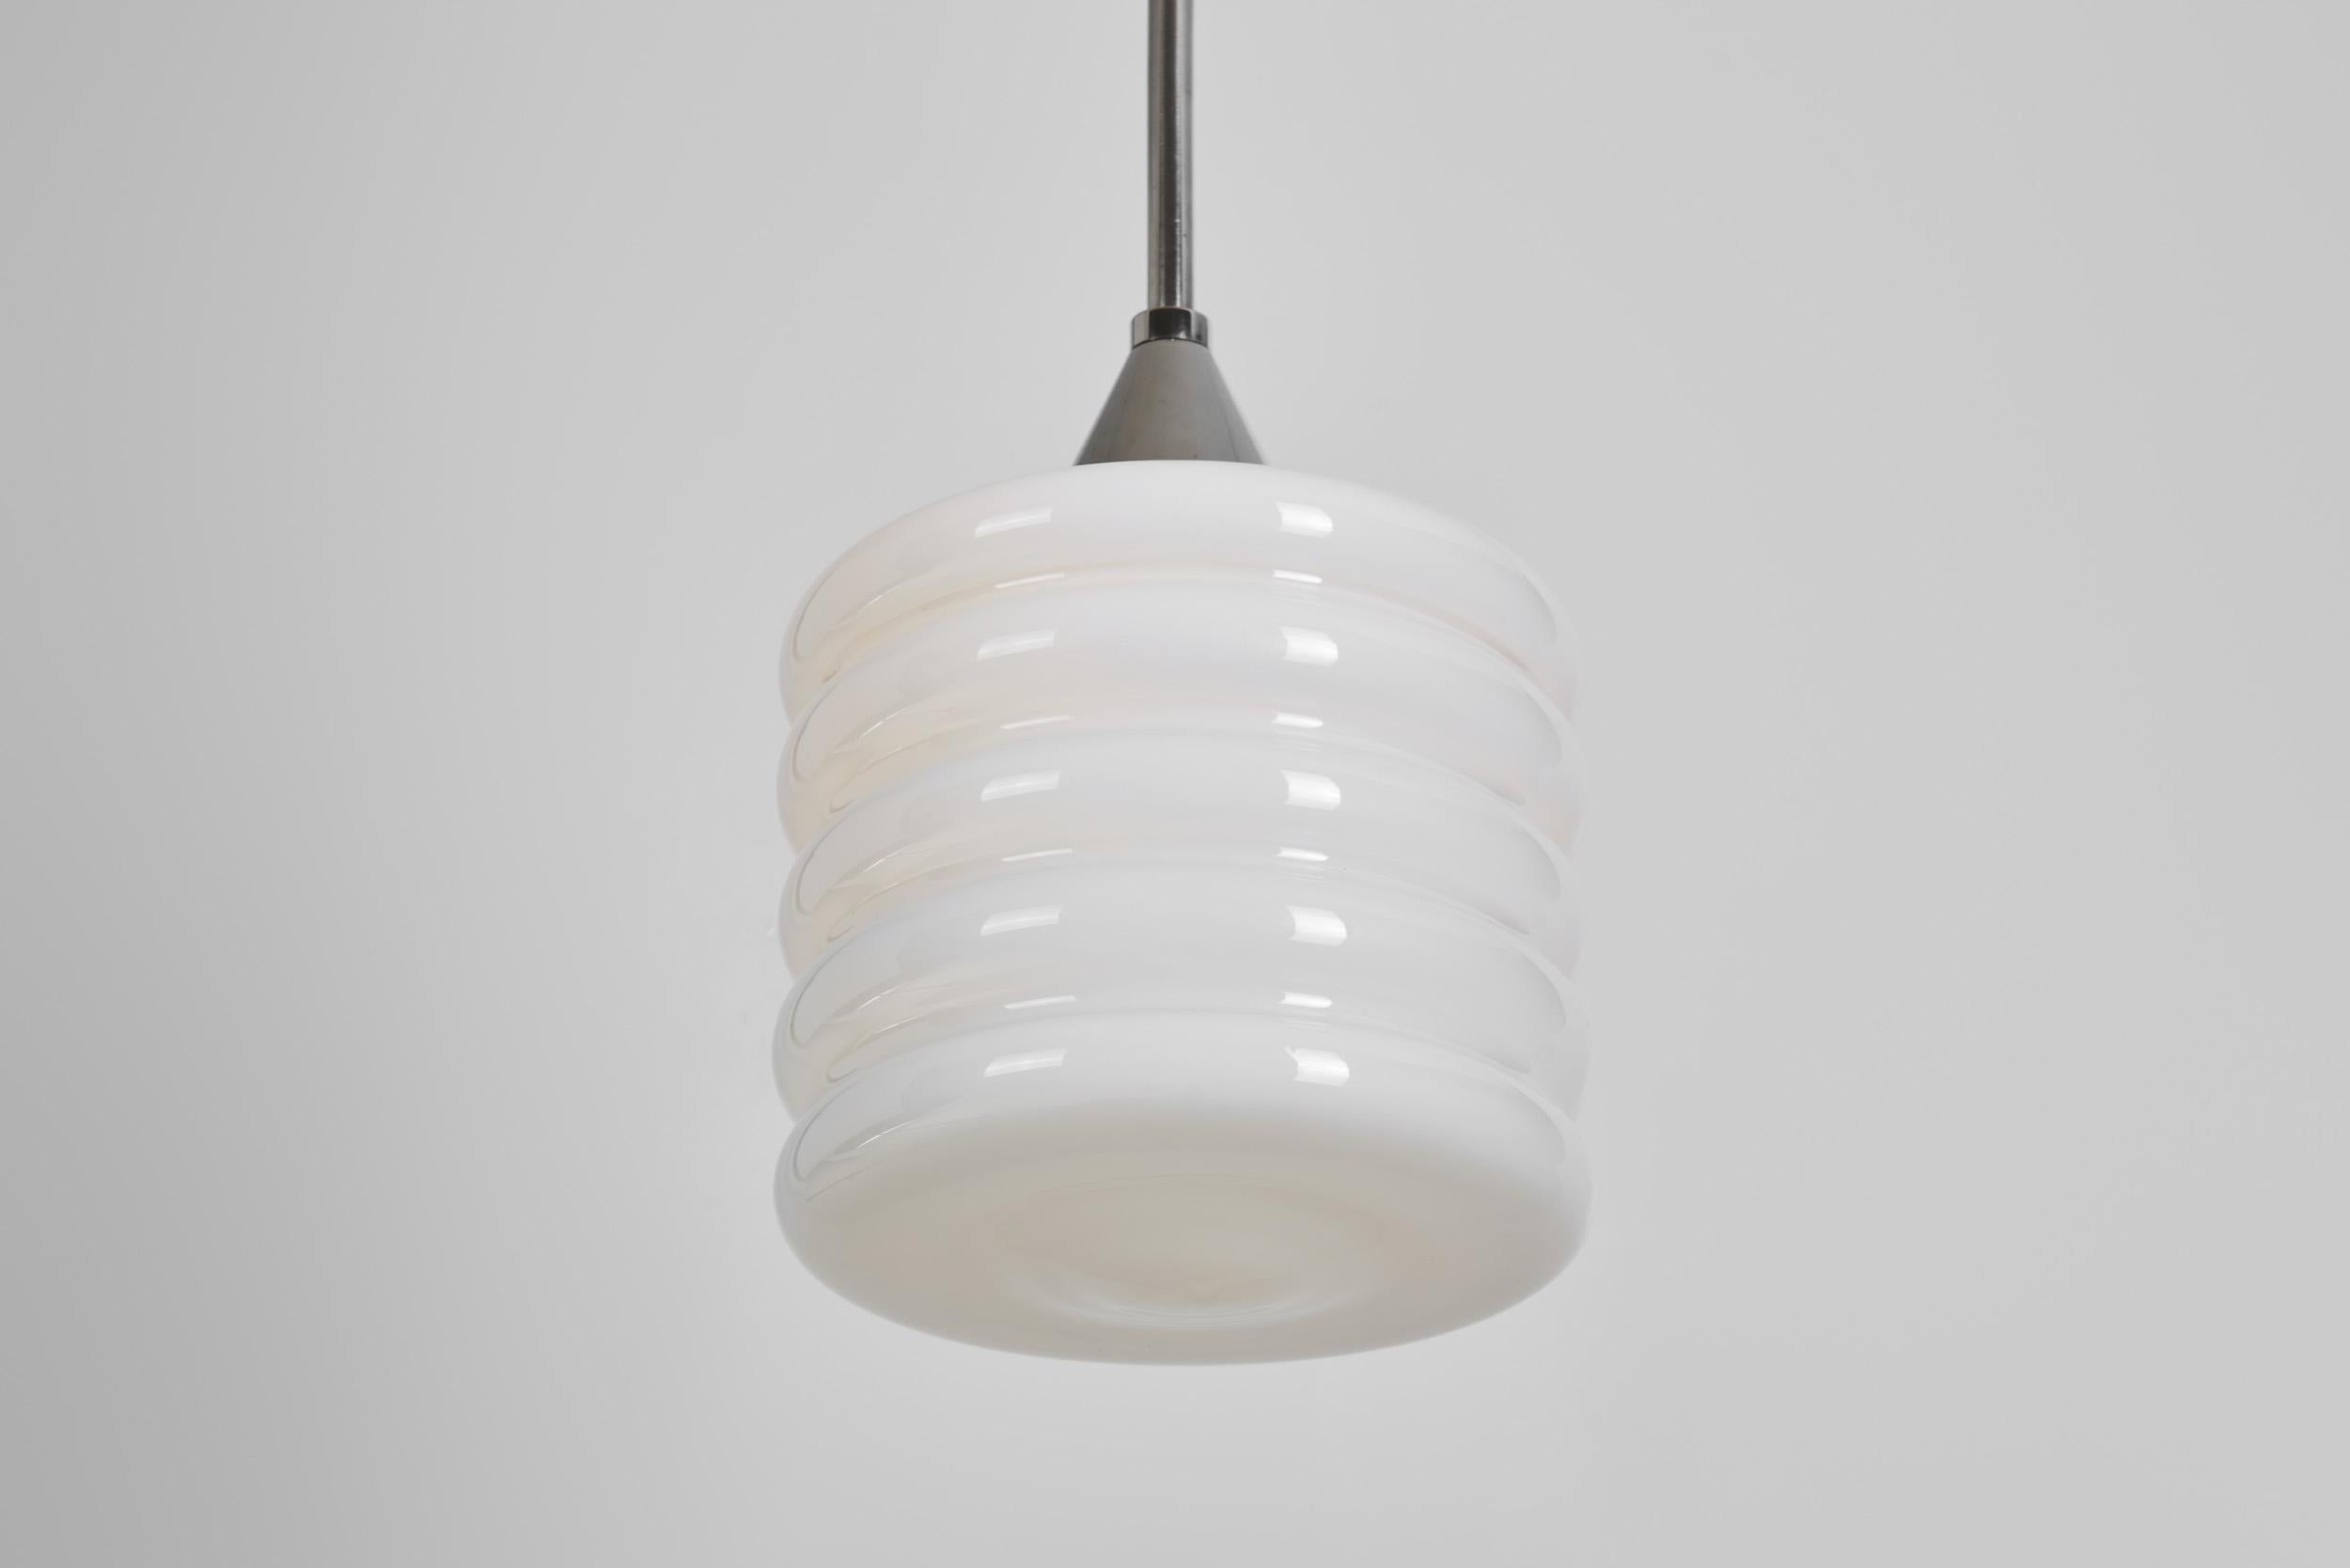 Paavo Tynell Glass Pendant Light Manufactured by Taito Oy, Finland 1930s For Sale 6